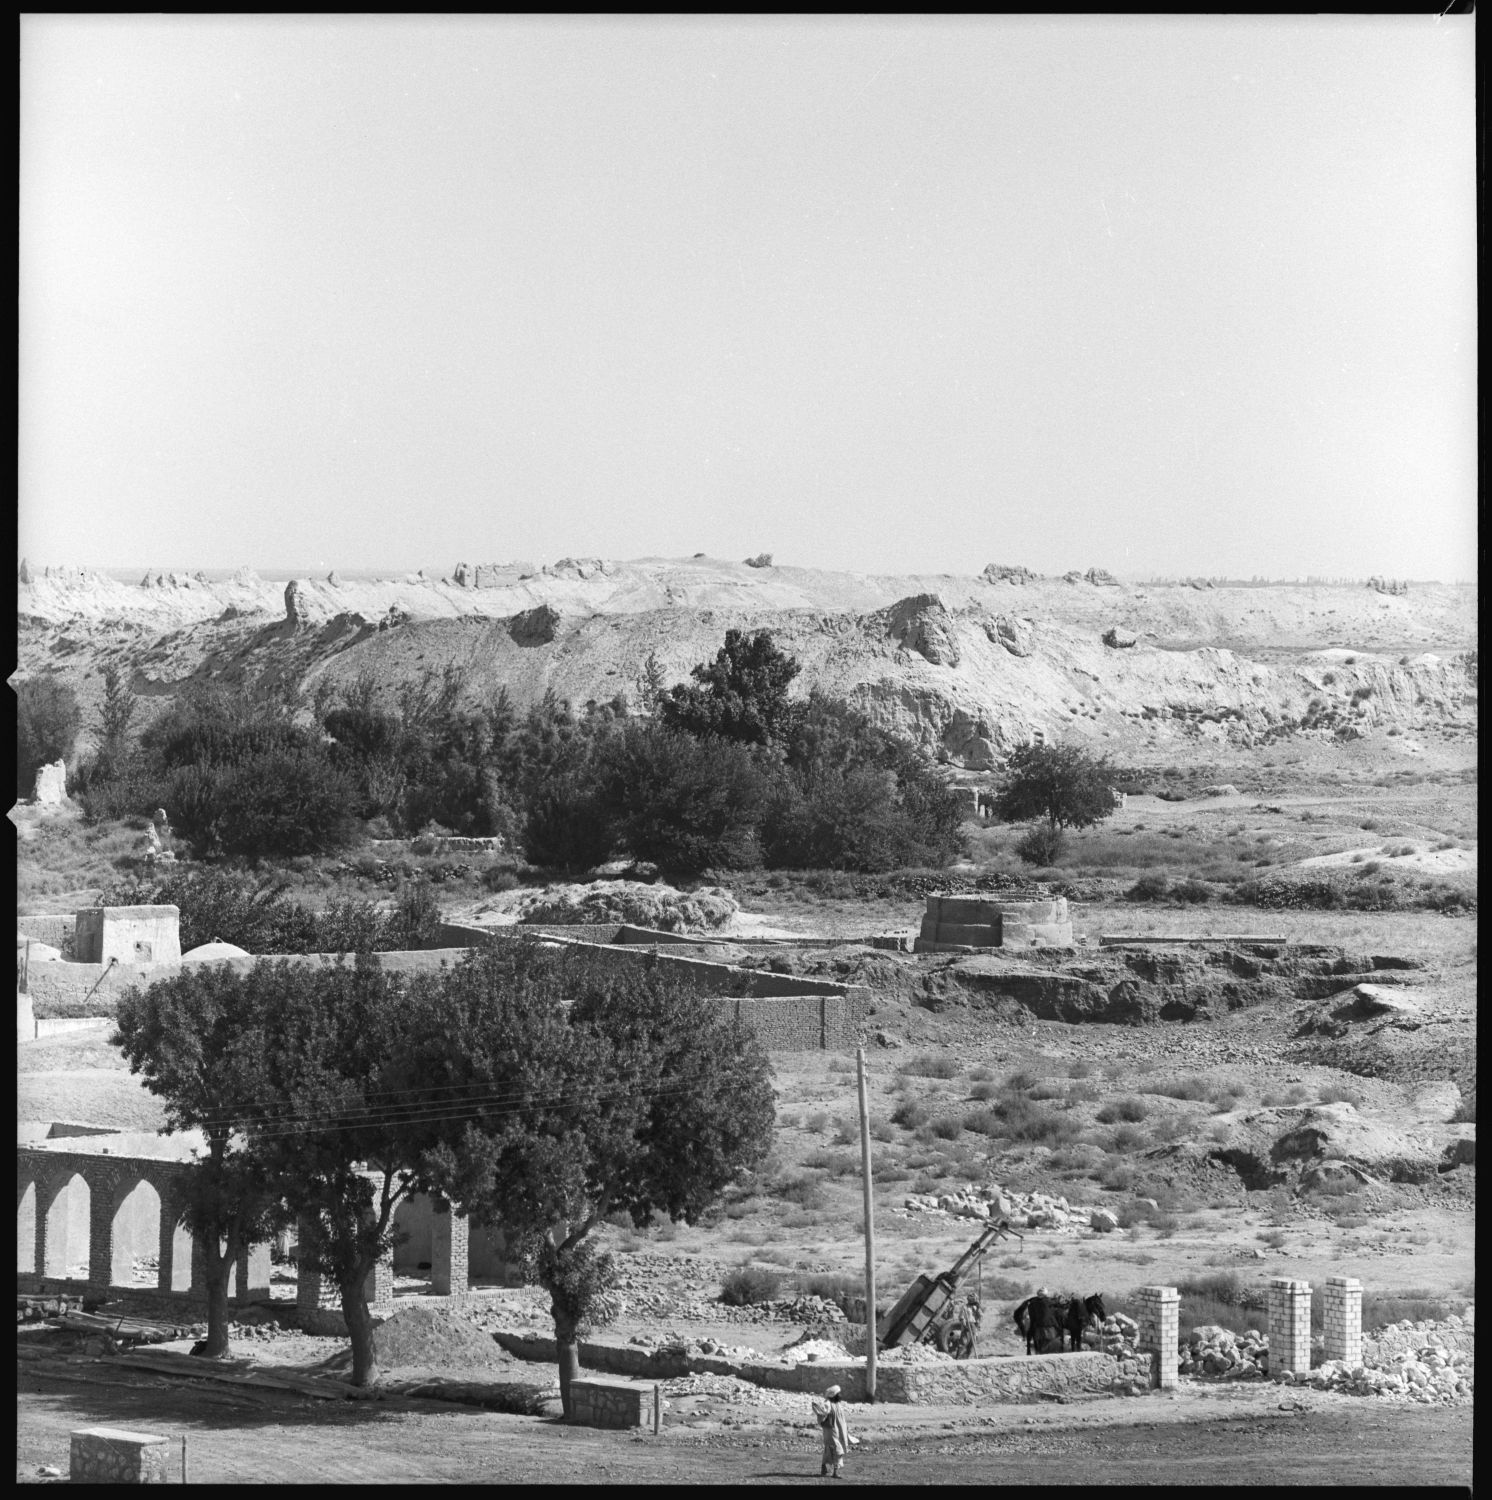 Distant view showing walls.